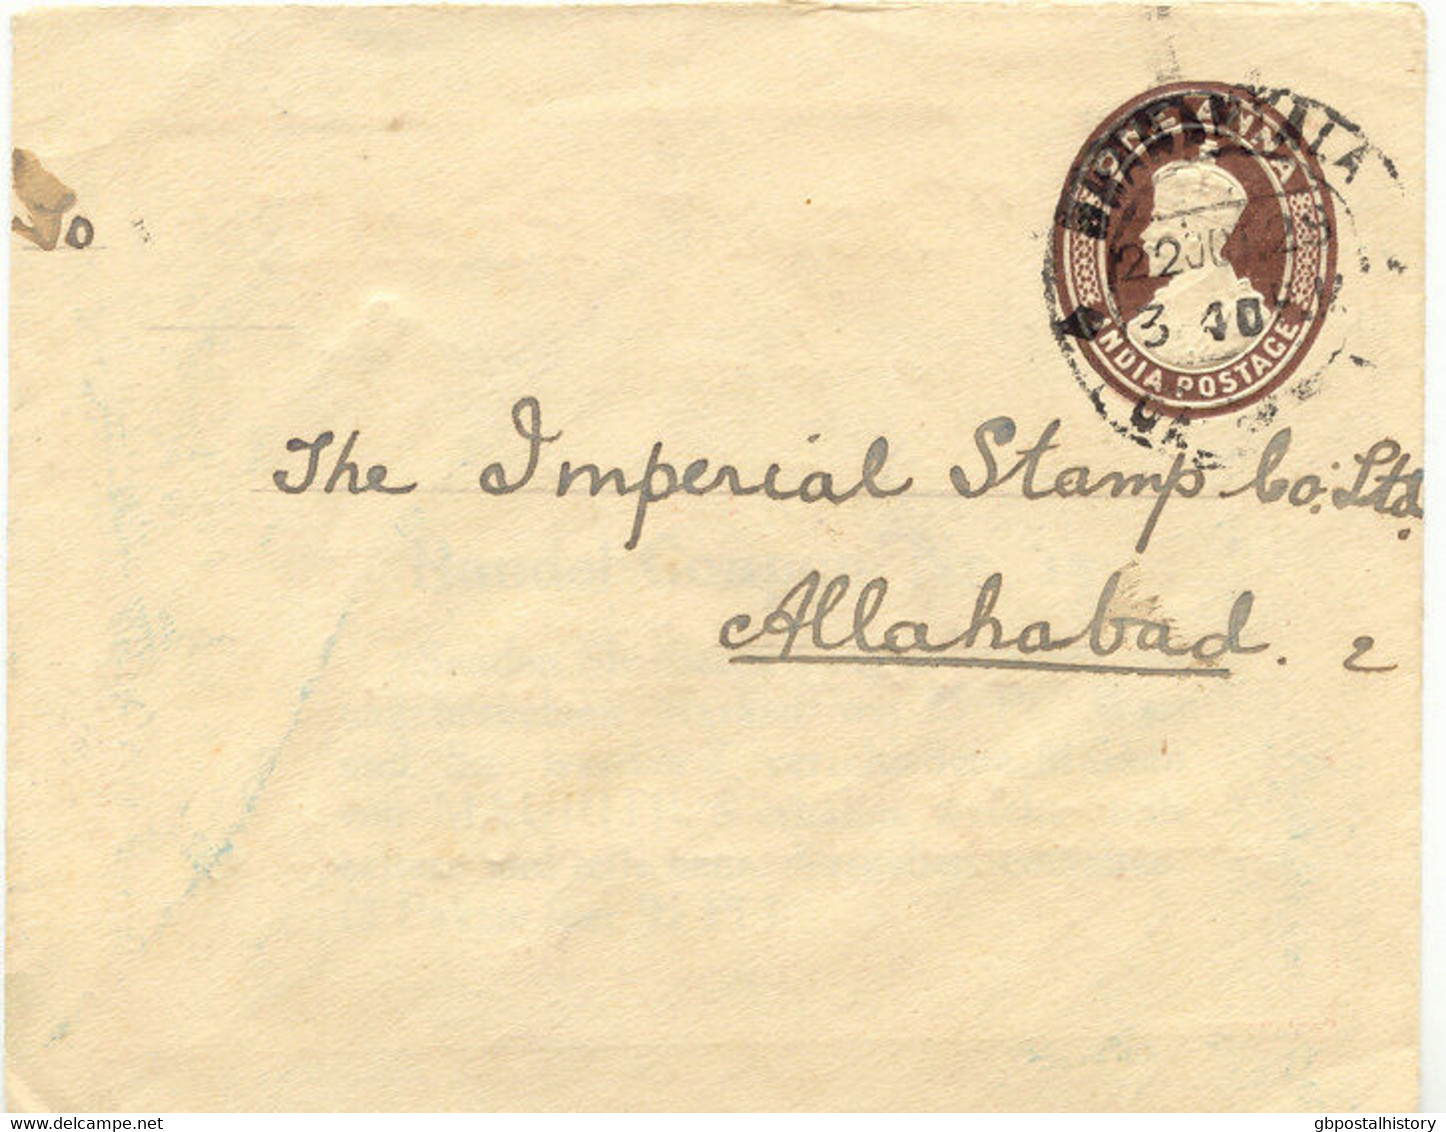 INDIA 1929 GV One Anna Stamped To Order Postal Stationery Envelope (ADVERTISING: Imperial Stamp Co. Ltd, Allahabad) - 1911-35 King George V